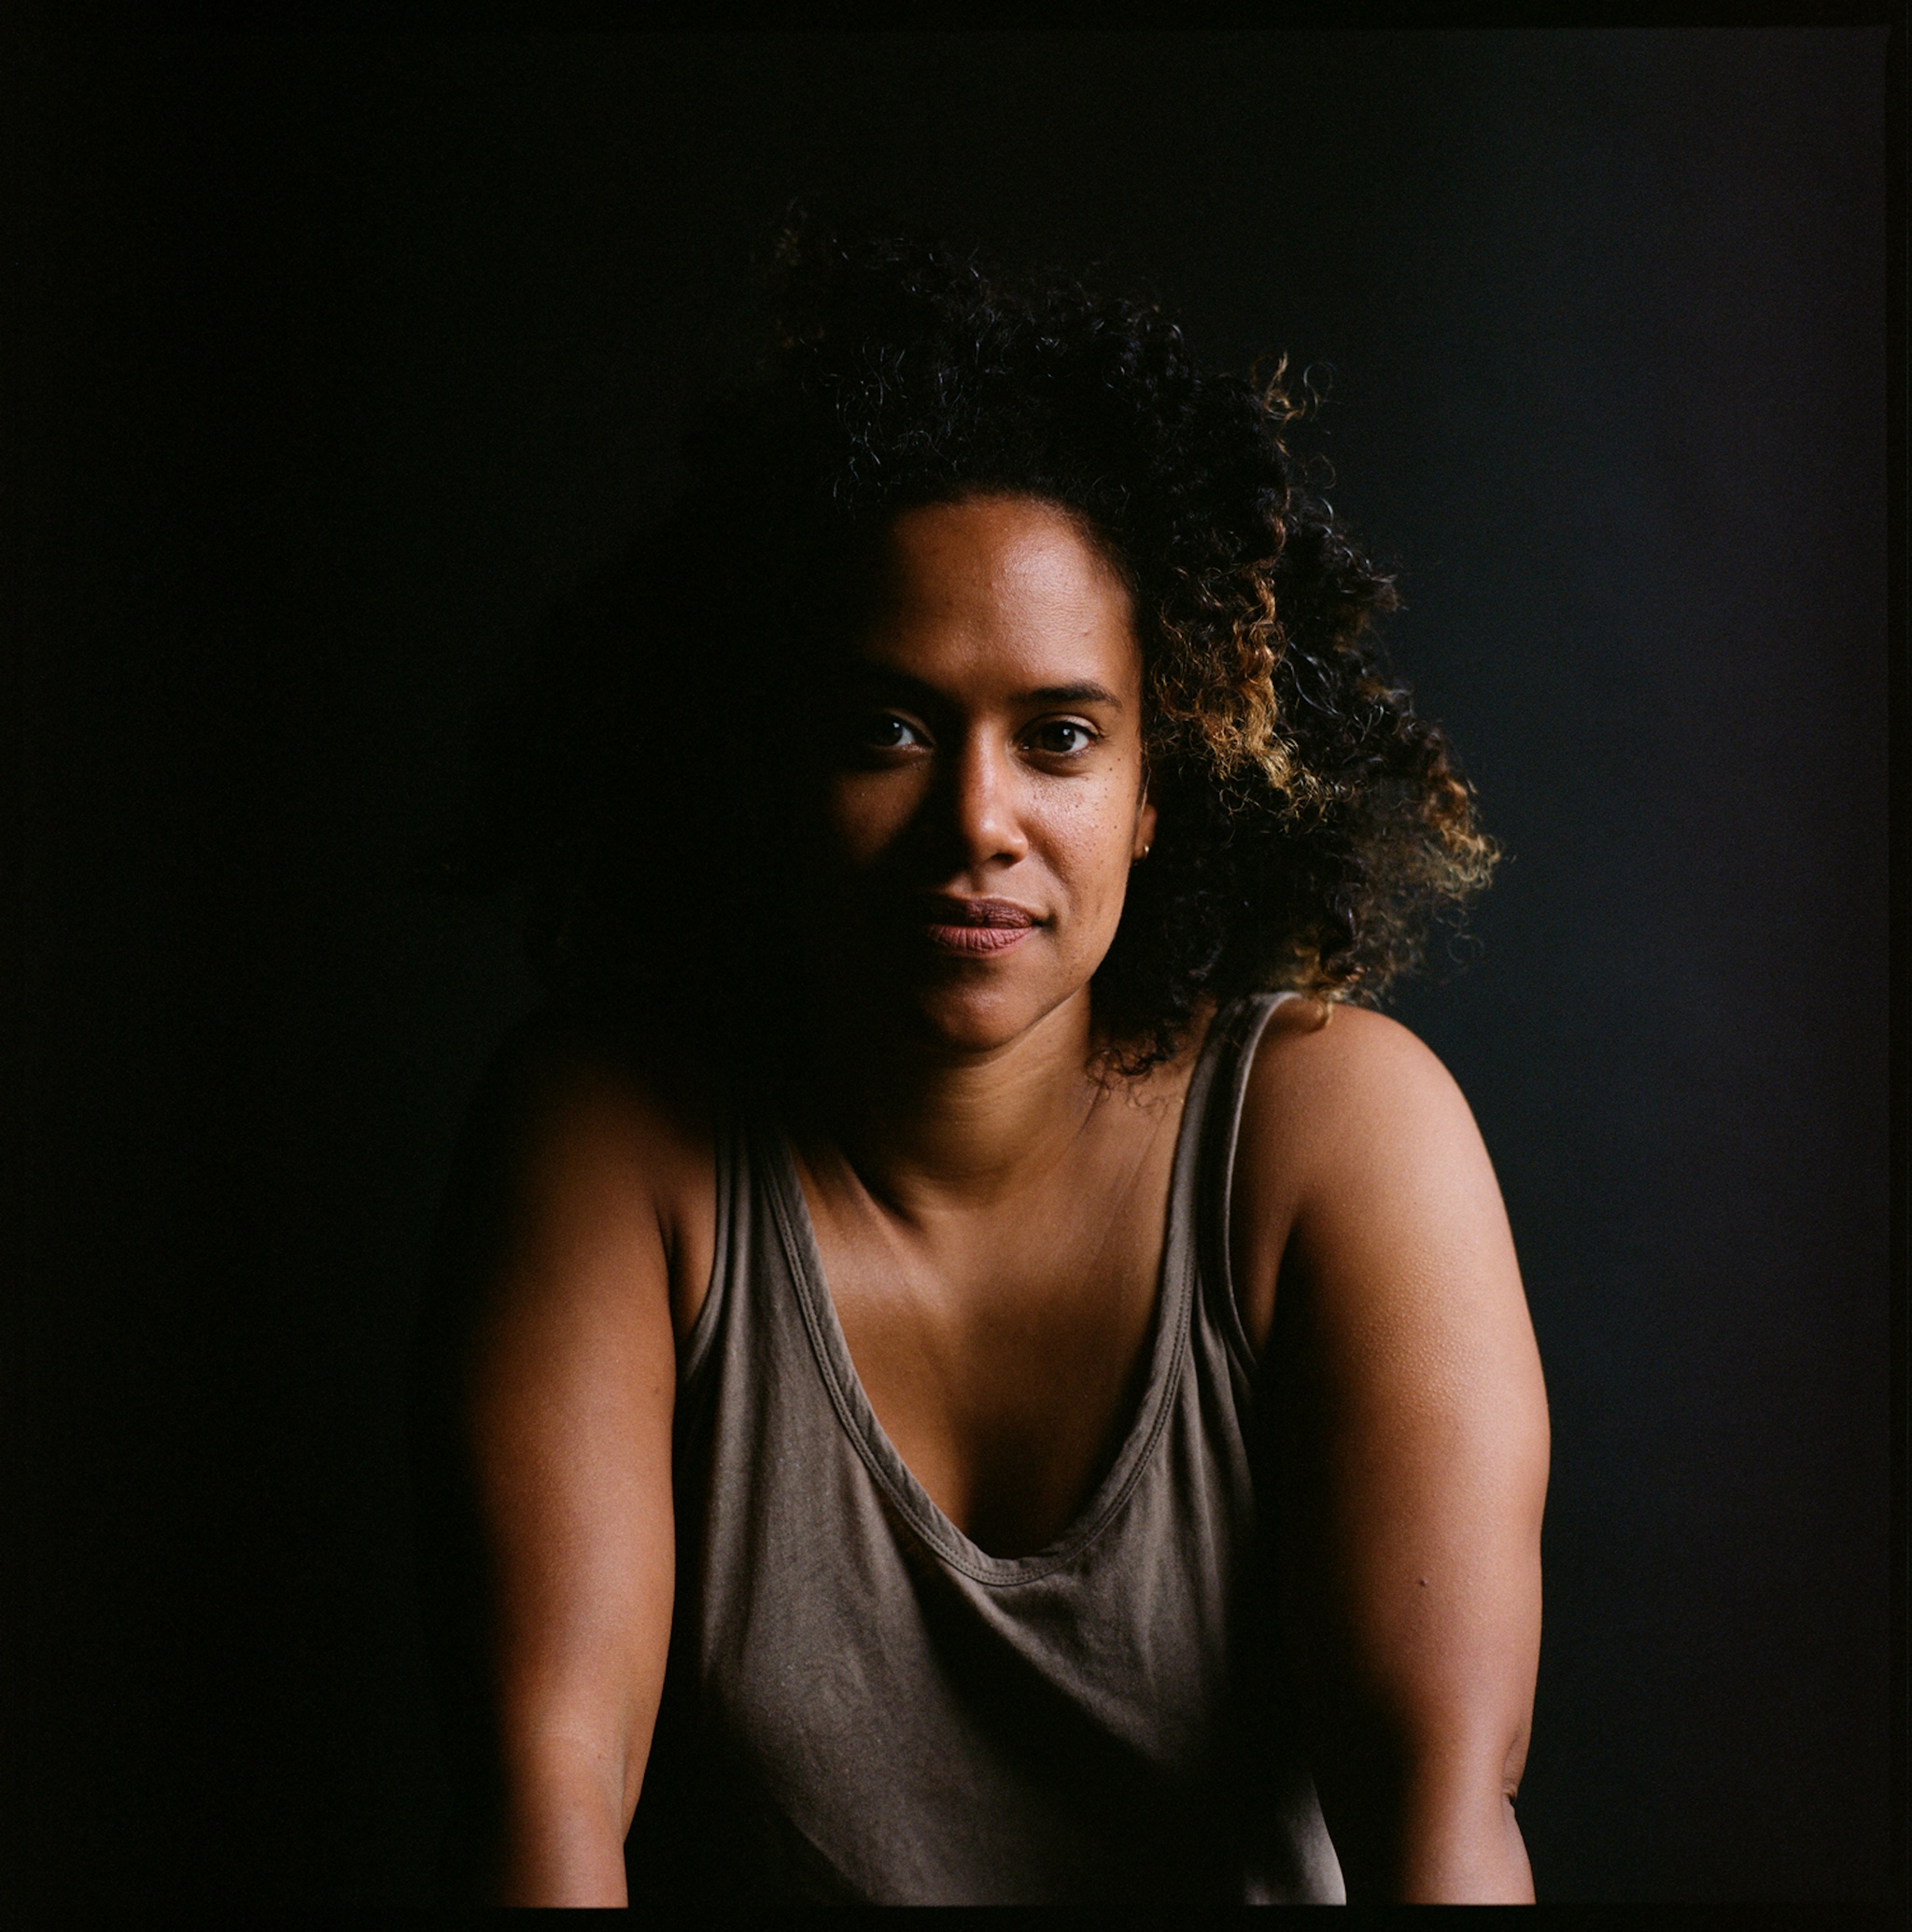 A photo of the artist Leslie Cuyjet who wears a loose tank top and sits against a dark background with her face partly in shadow.